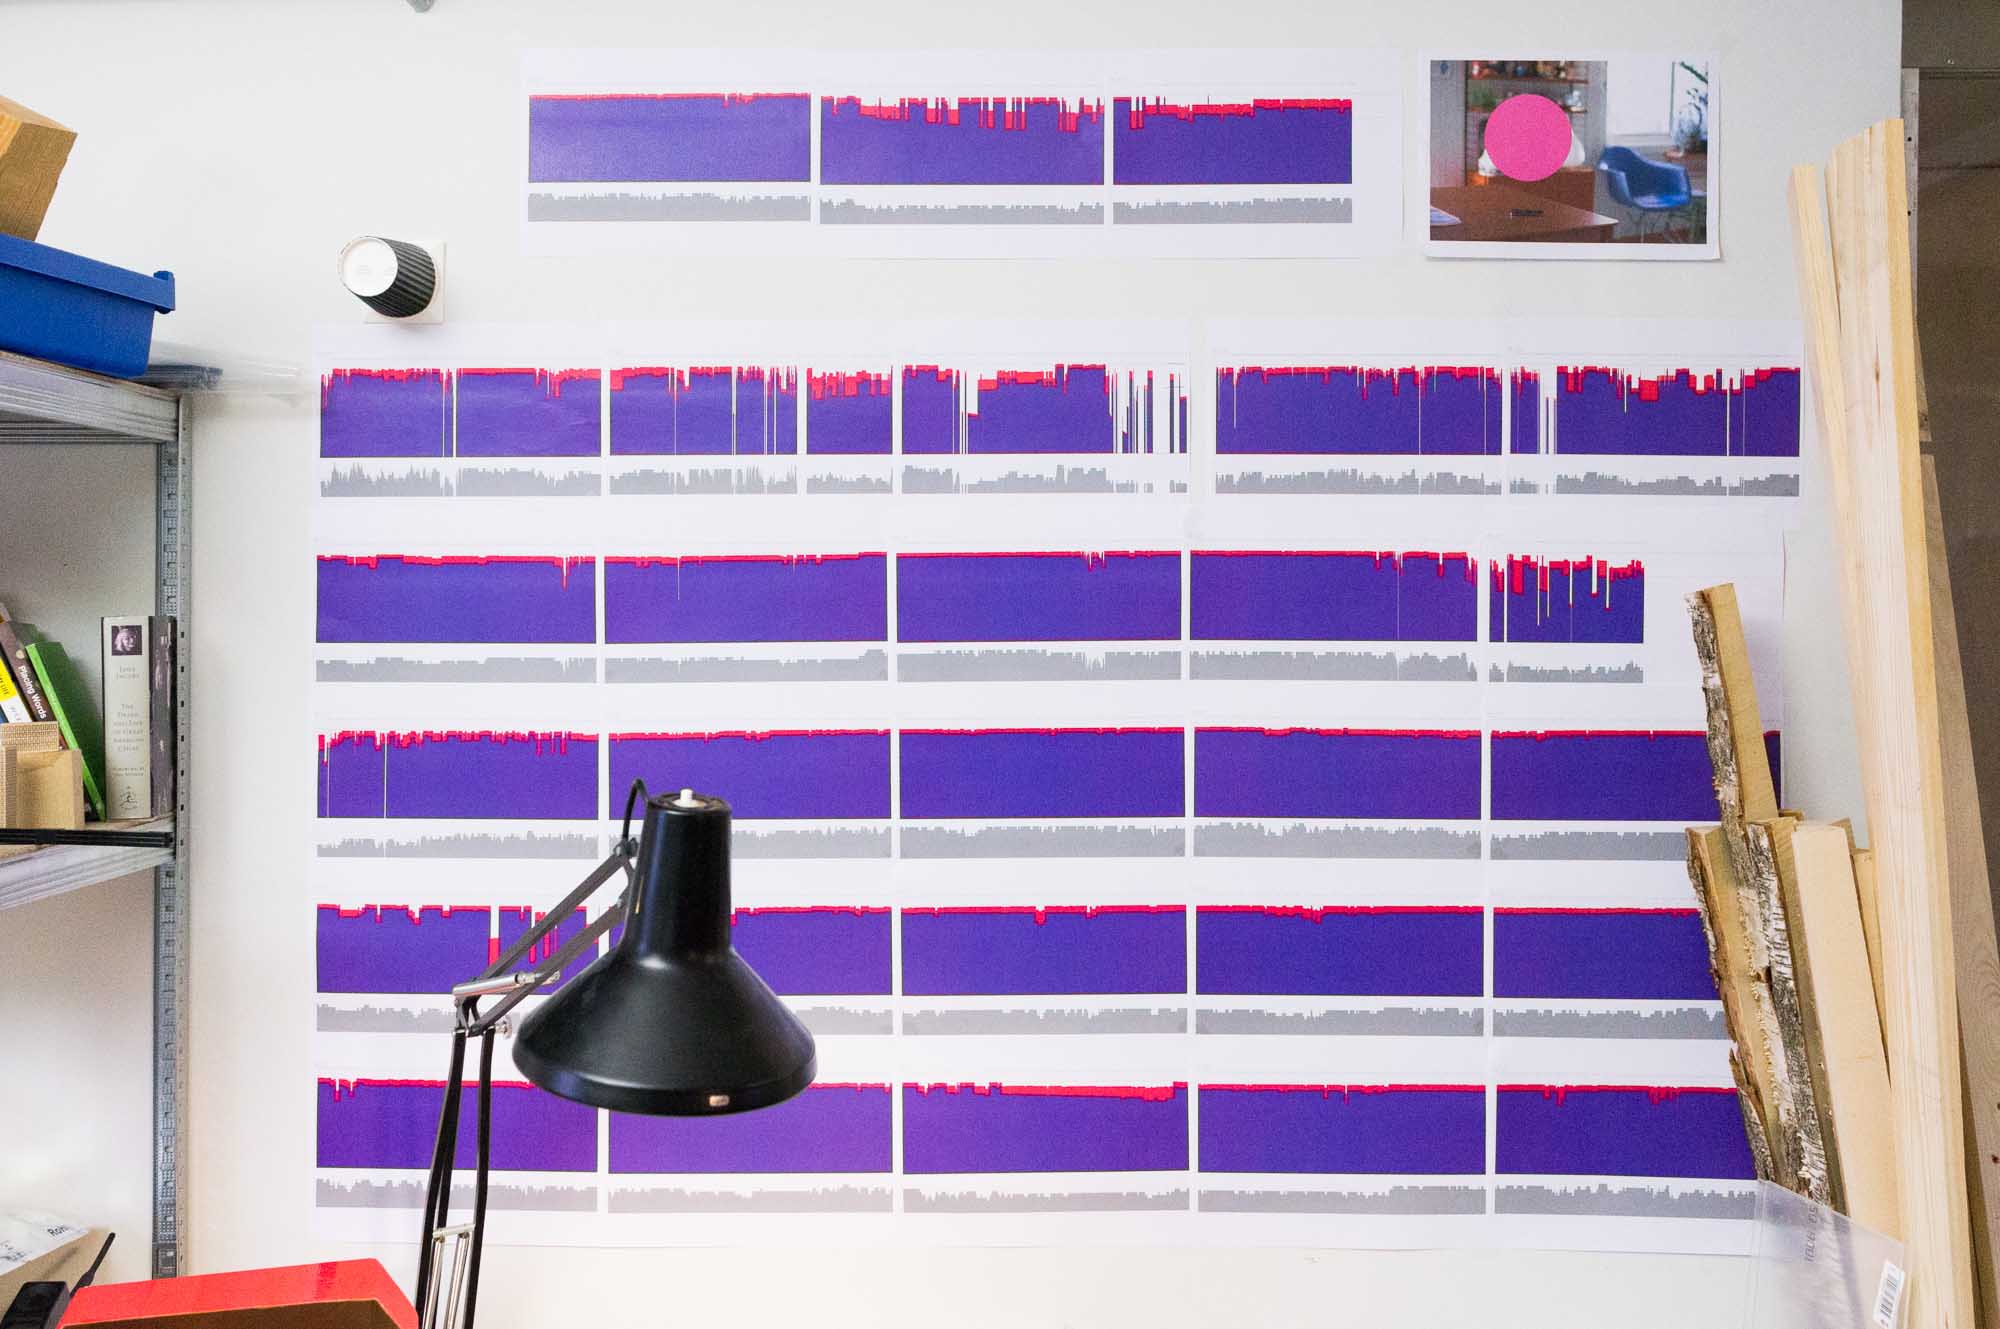 Wall of graphs